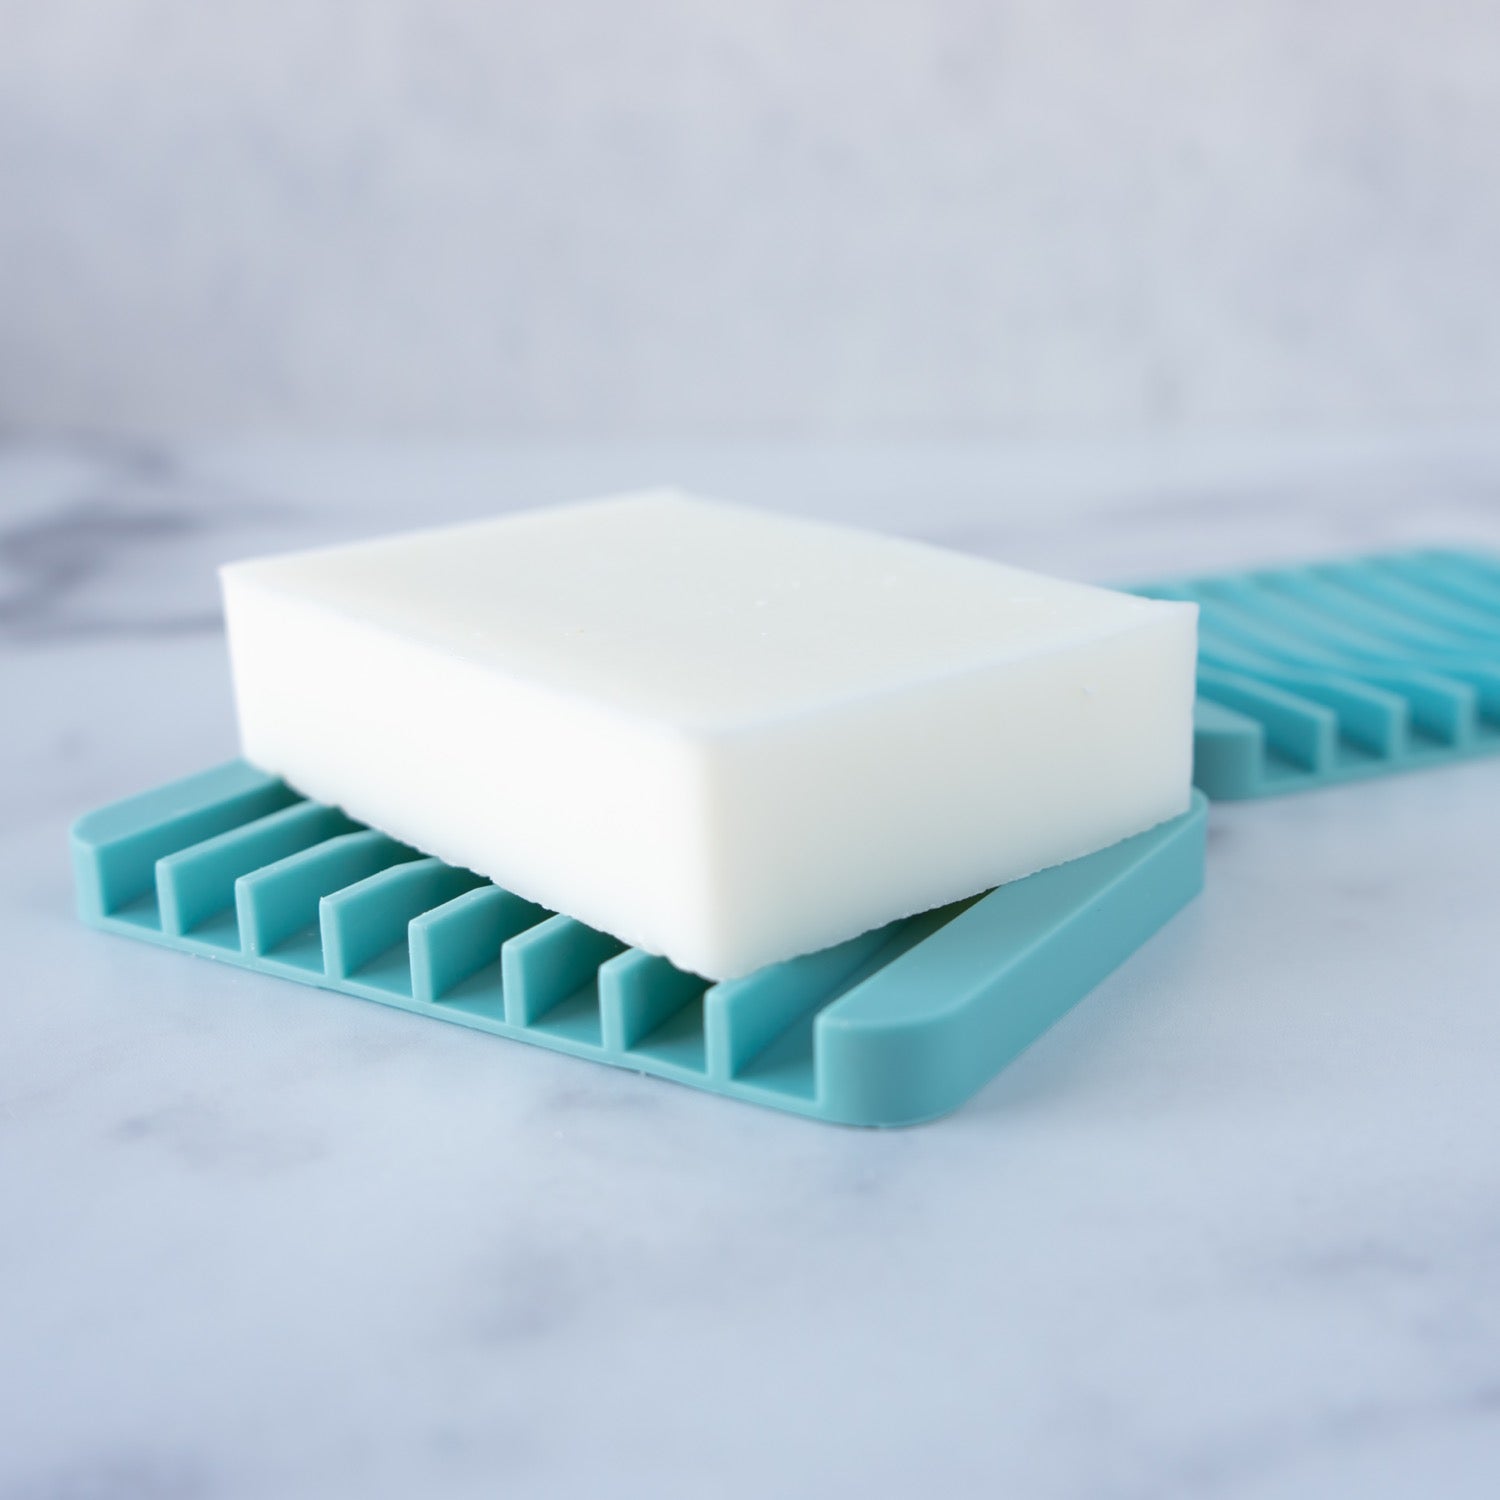 https://cdn.shopify.com/s/files/1/0691/2304/7743/products/self-draining-silicone-soap-dish-592646.jpg?v=1690593660